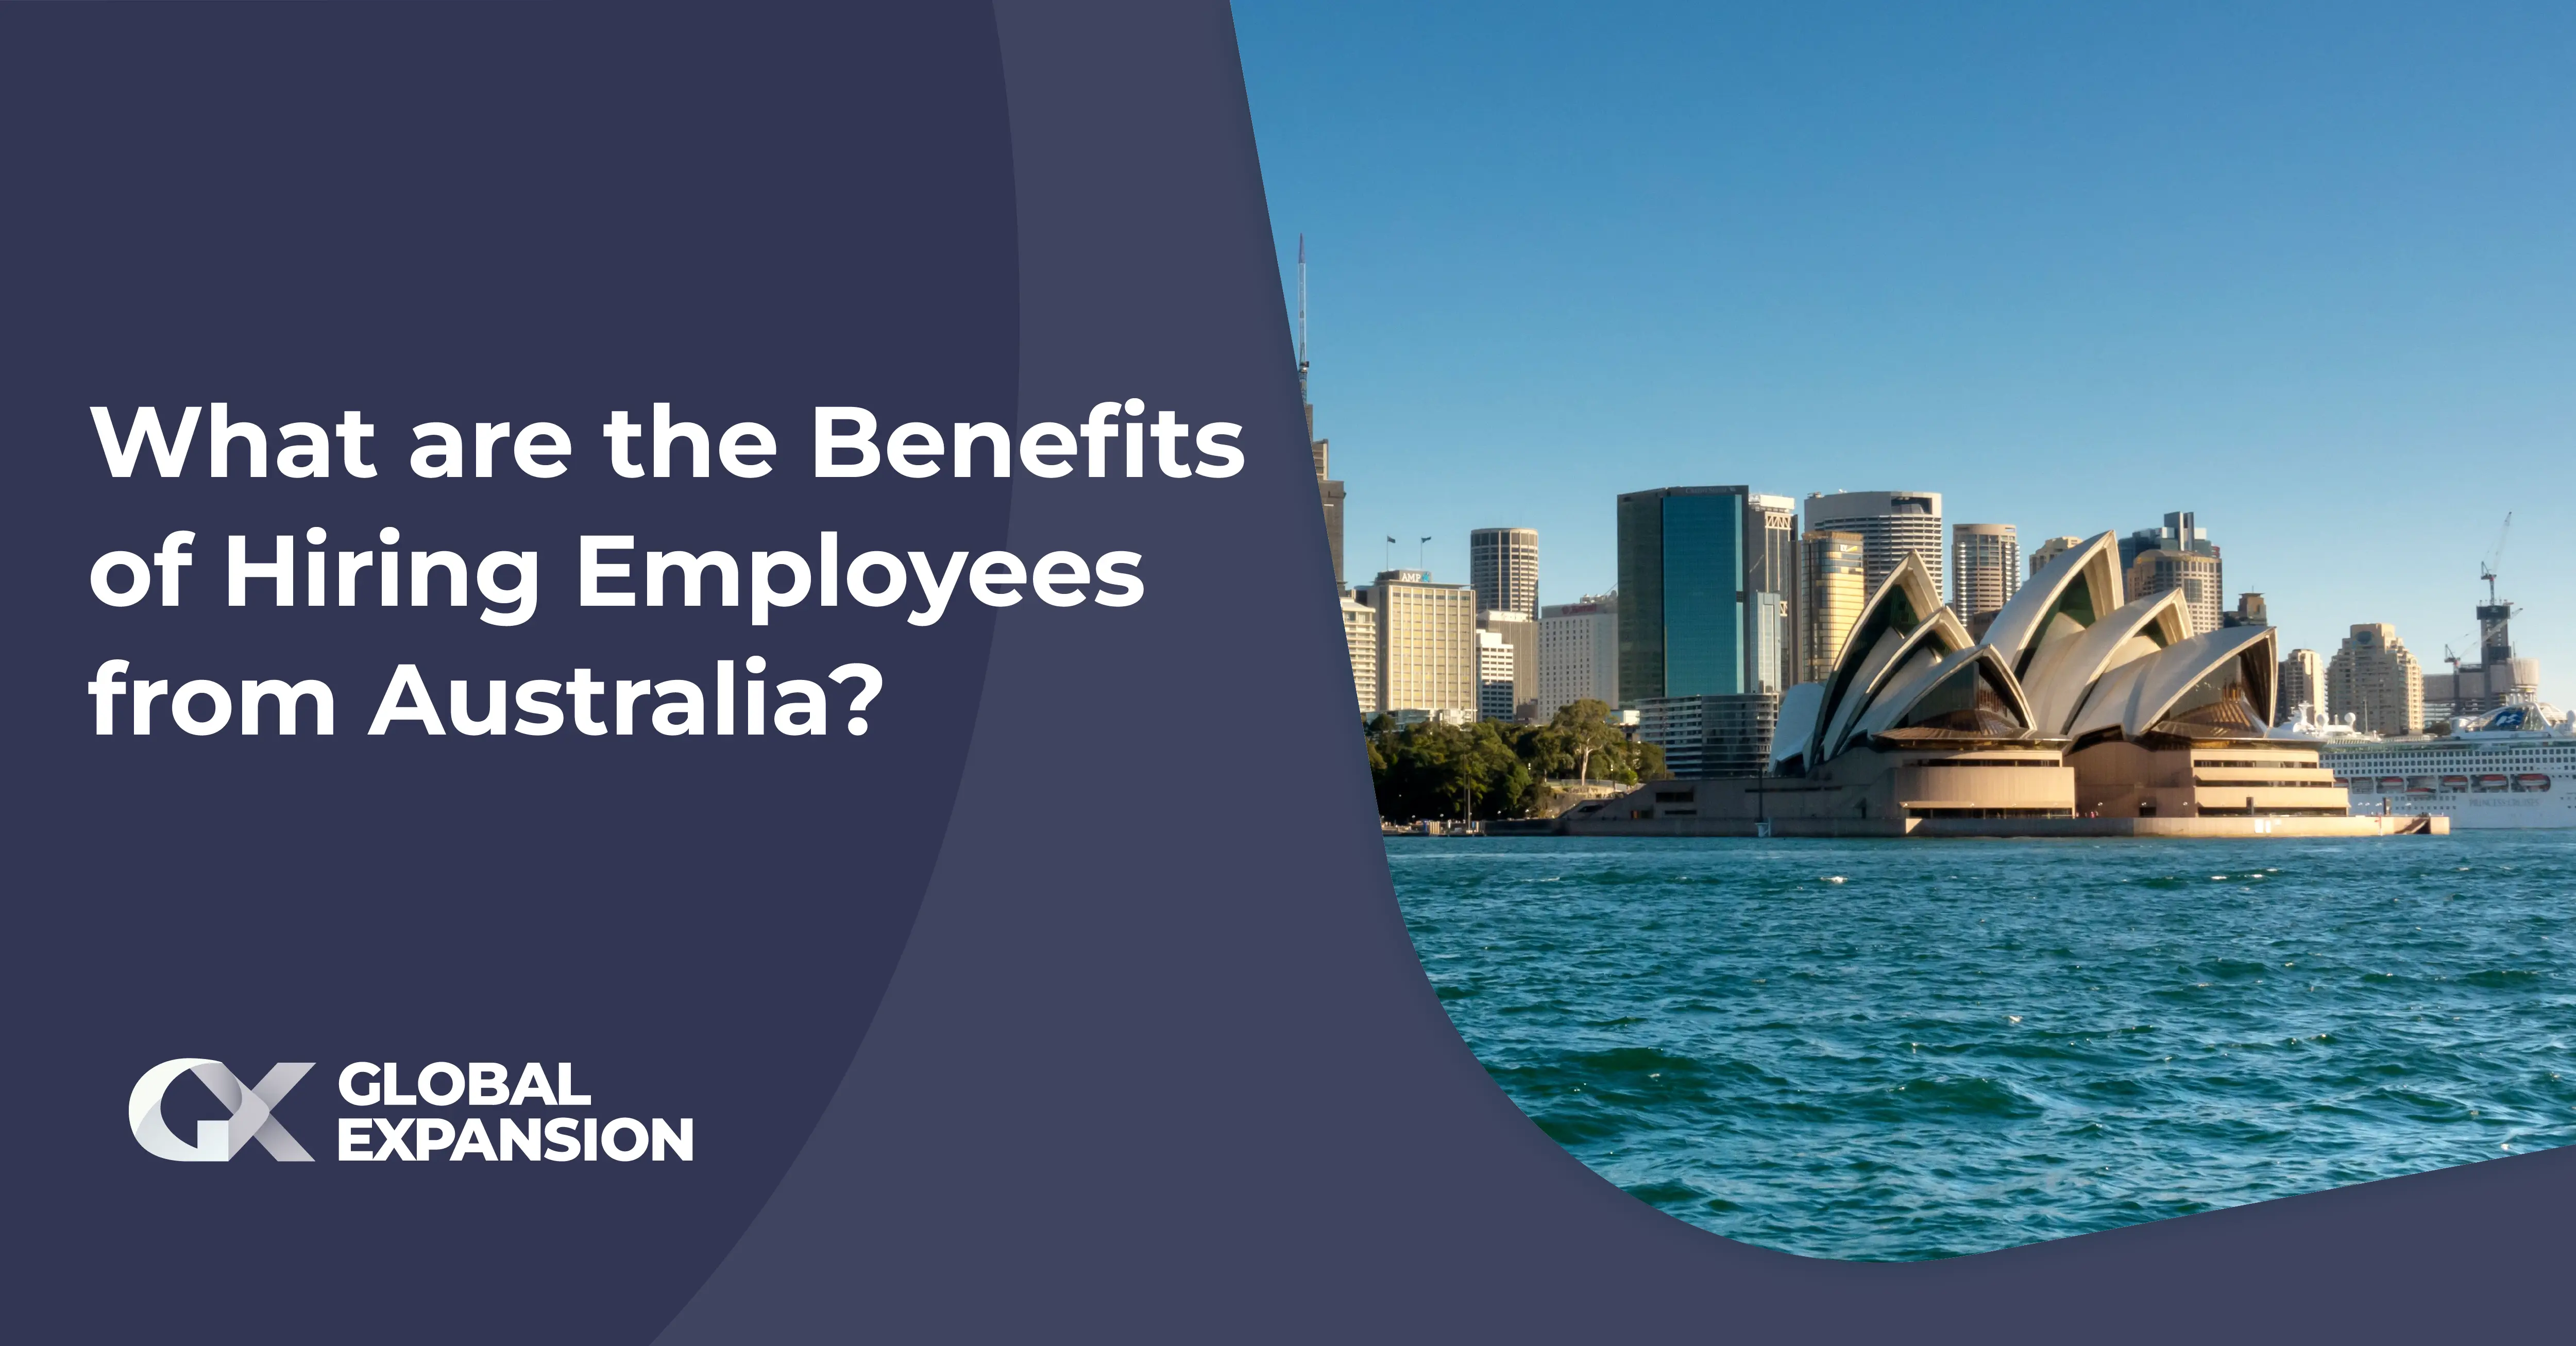 What are the Benefits of Hiring Employees from Australia?